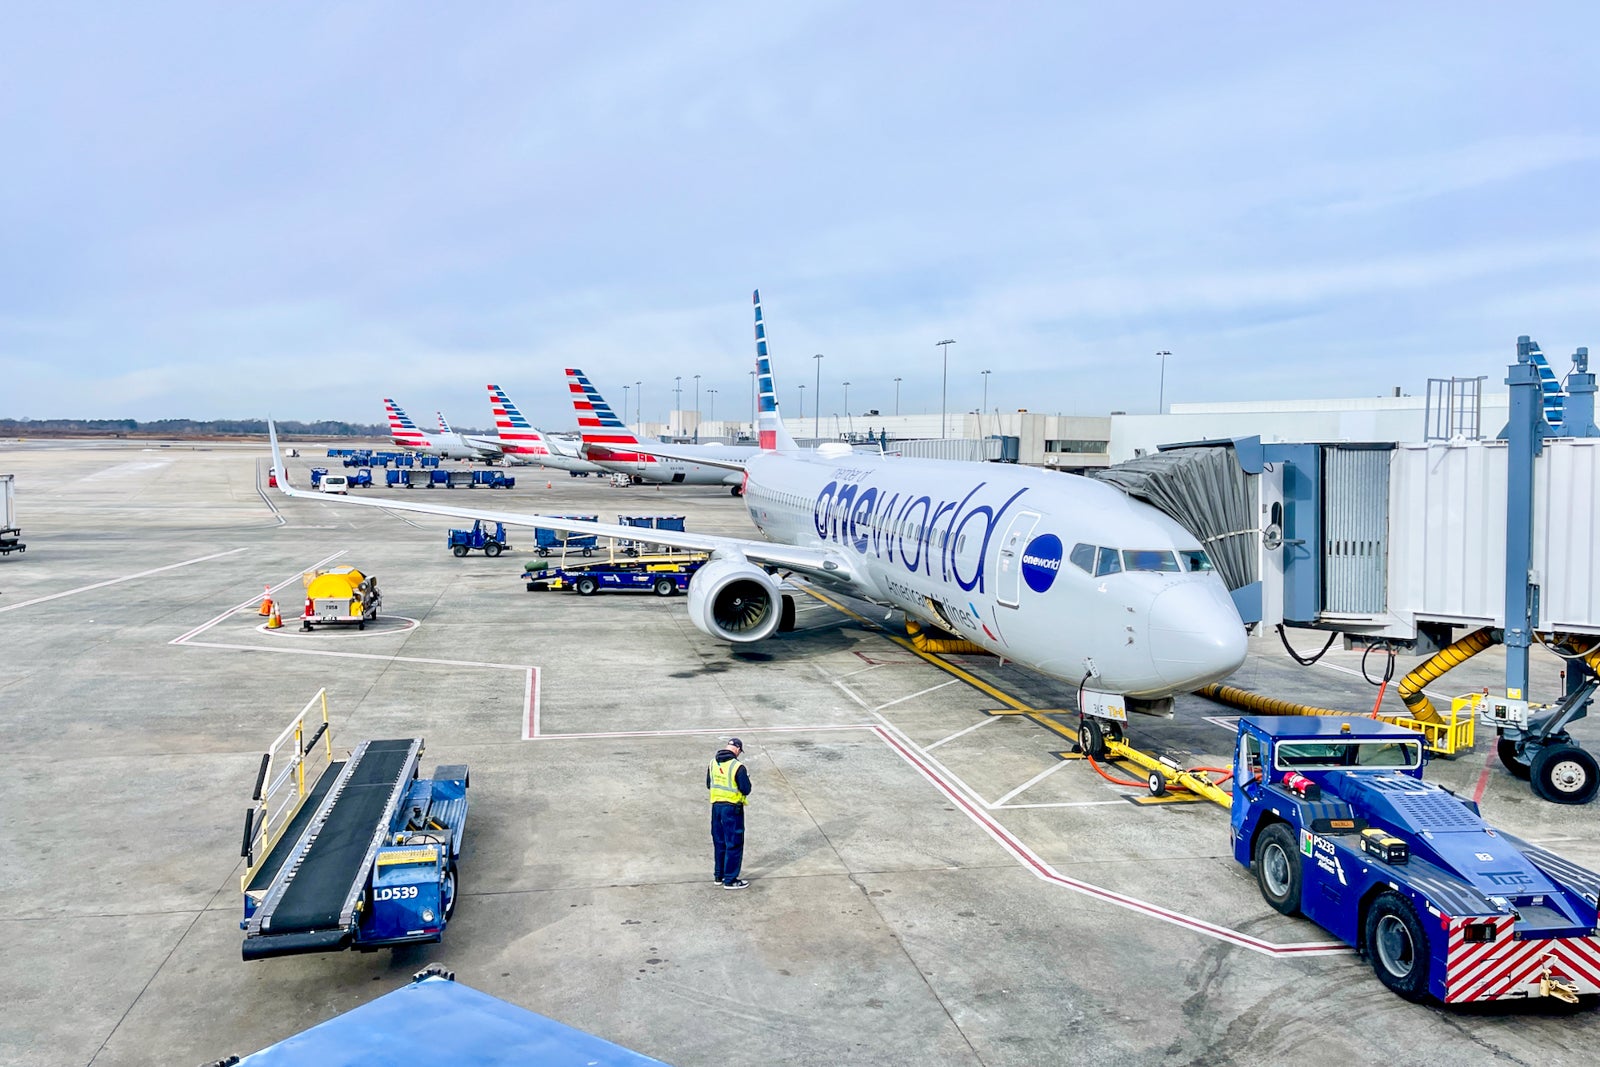 Read more about the article Oneworld status match opportunity available for 20-plus loyalty programs — but is it worth it?